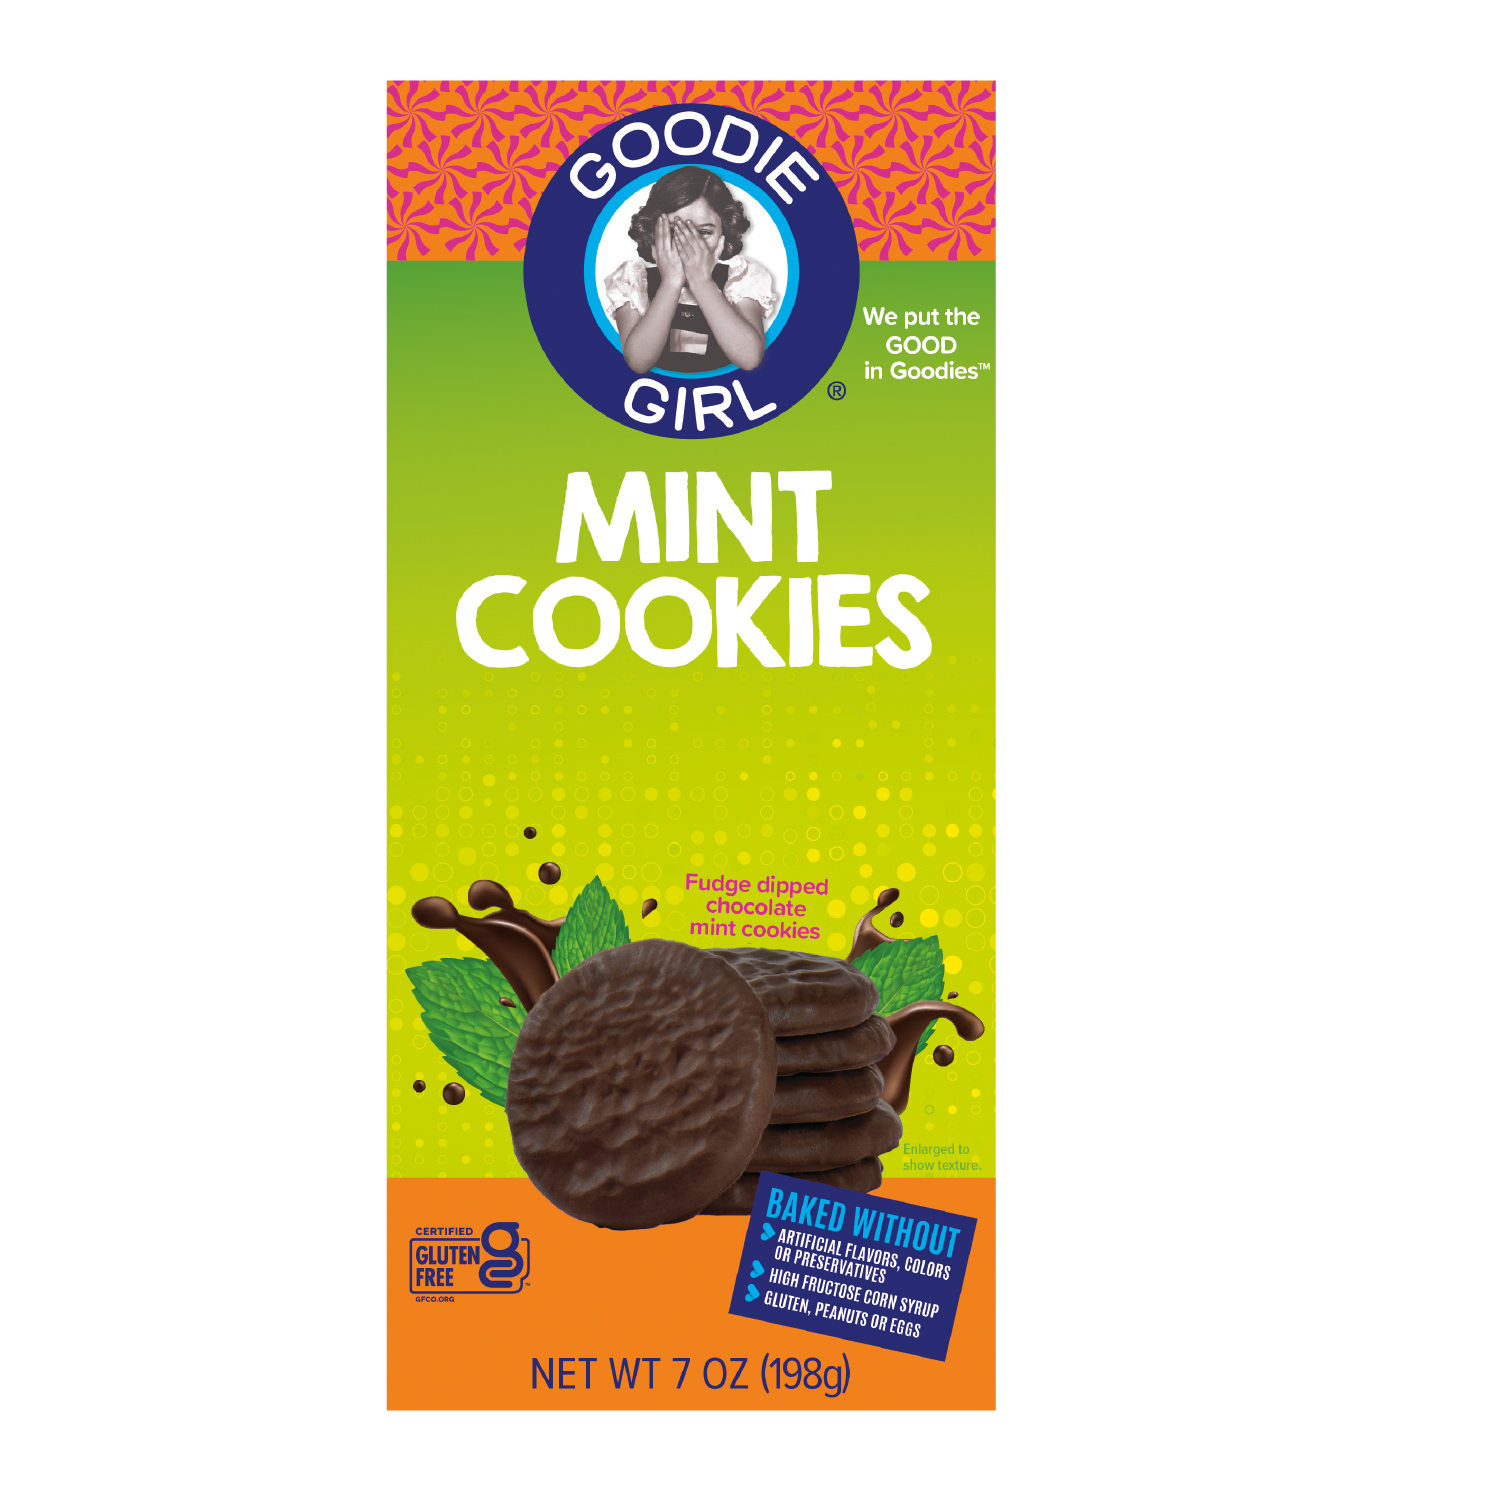 Goodie Girl Mint Cookies, Gluten Free, Shelf Stable, 7 oz Box - image 4 of 10